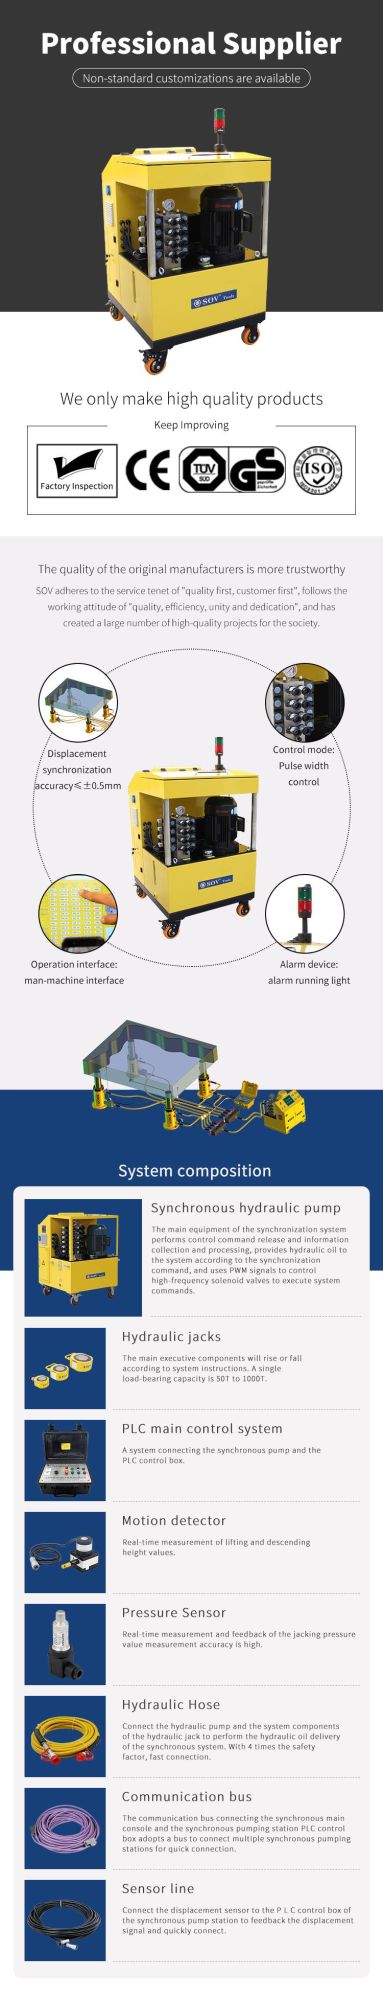 4-Point Hydraulic Synchronous Lifting Pulse Width Modulation PLC System